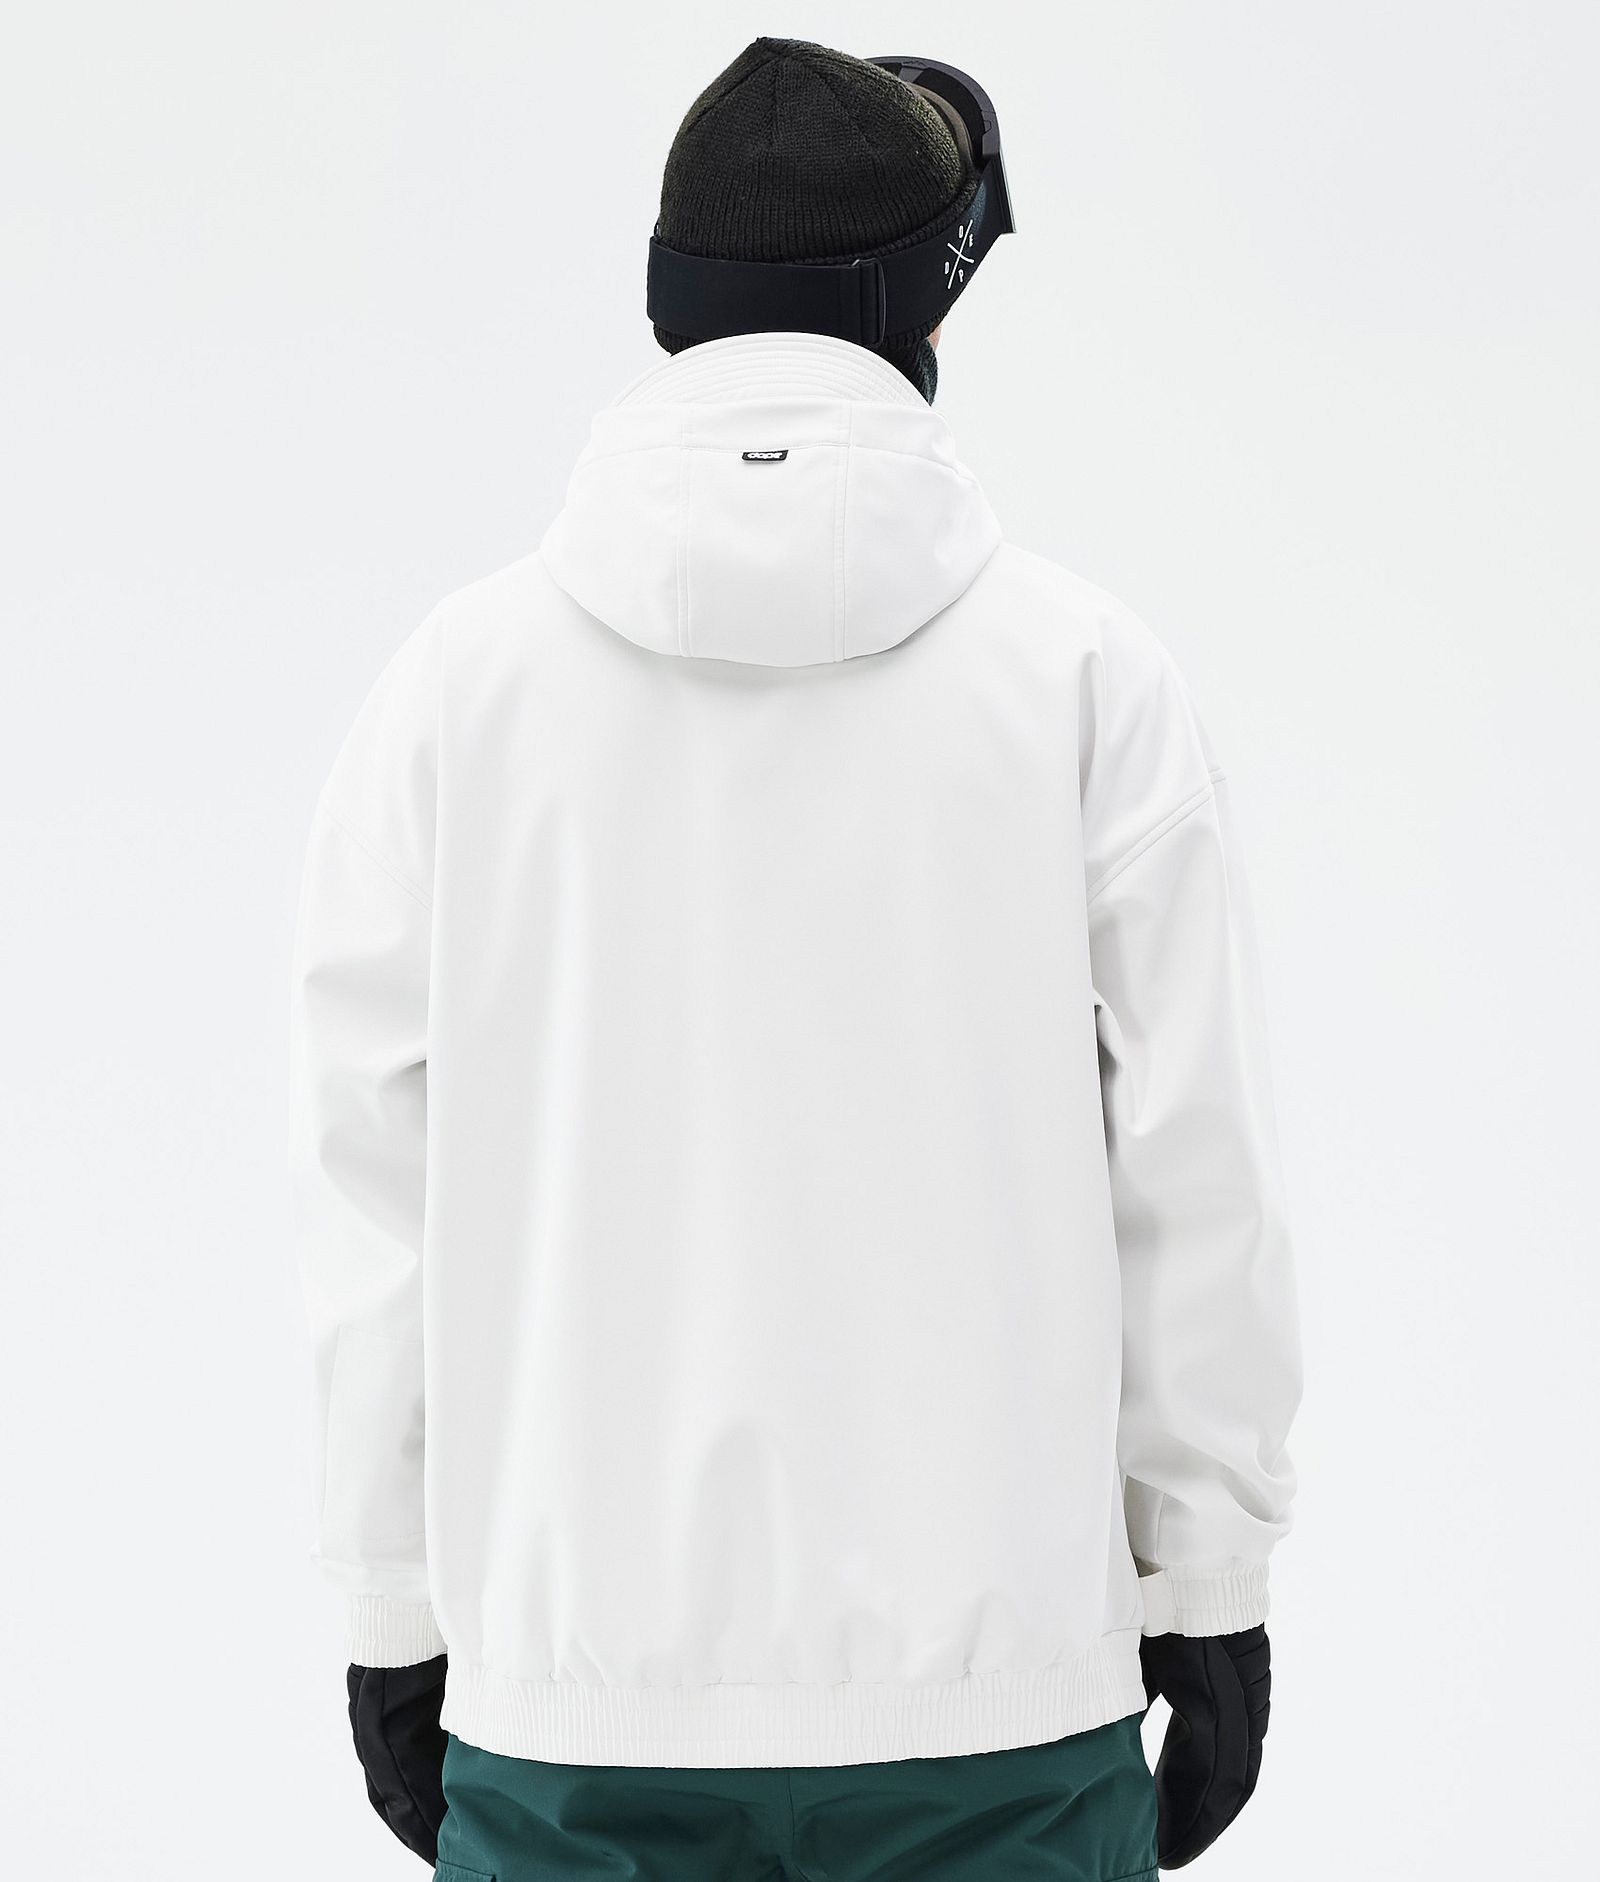 Dope Cyclone Veste Snowboard Homme Old White, Image 7 sur 9